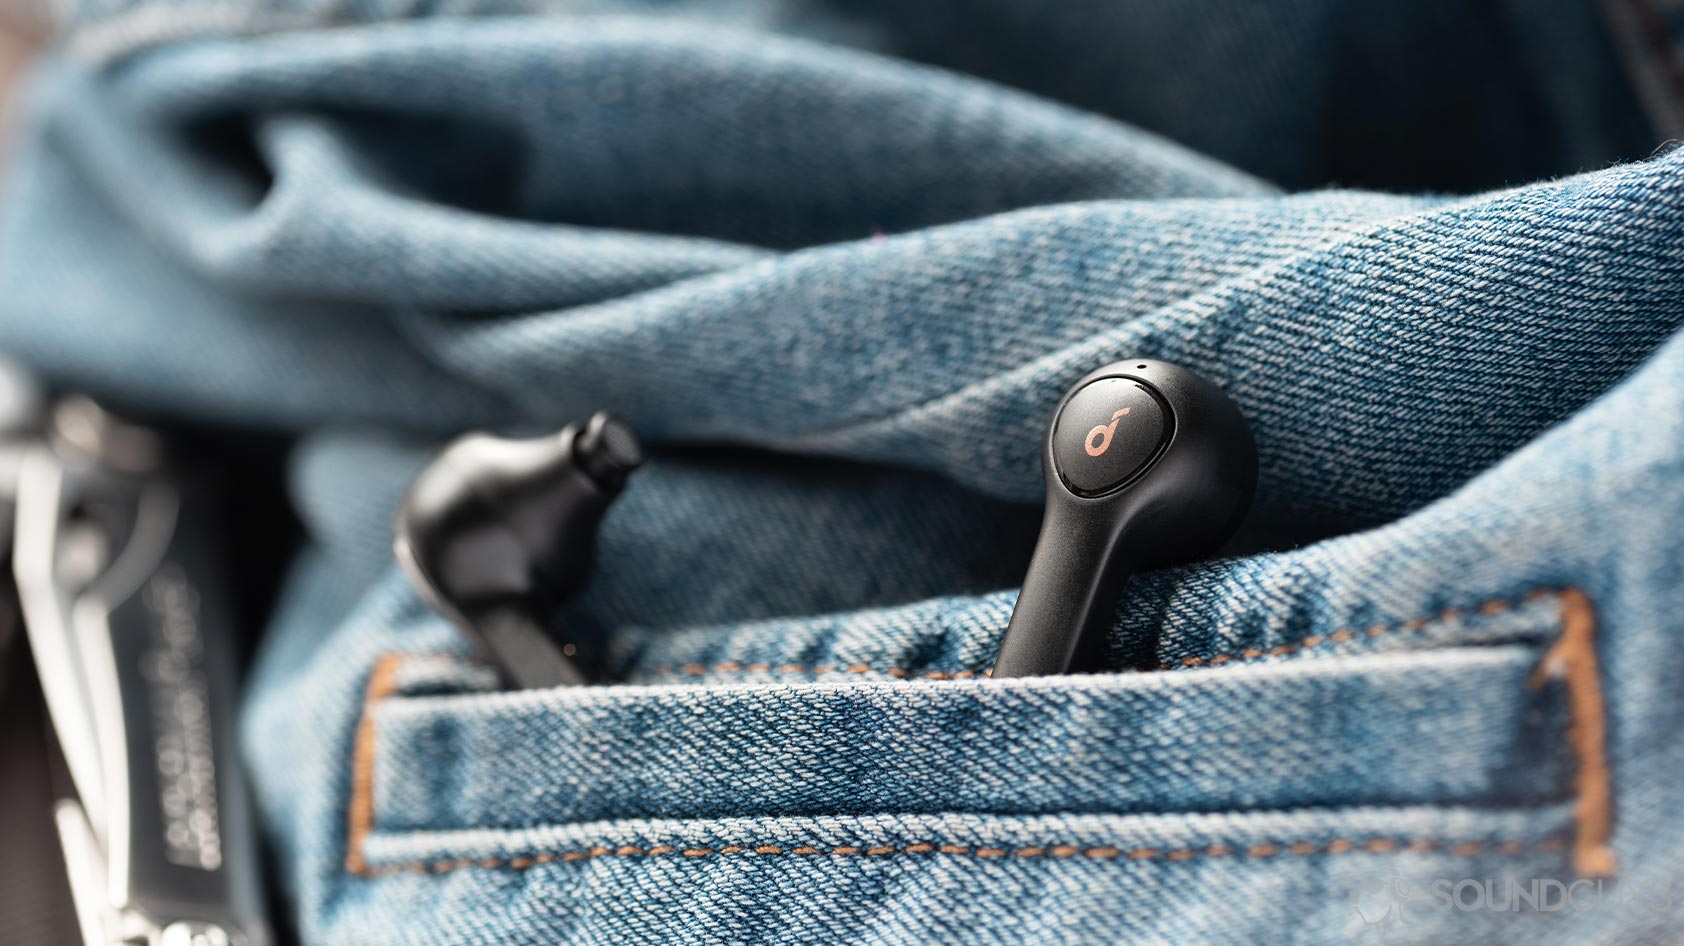 A picture of the Anker Soundcore Life P2 true wireless earbuds sticking out from a denim jacket pocket.